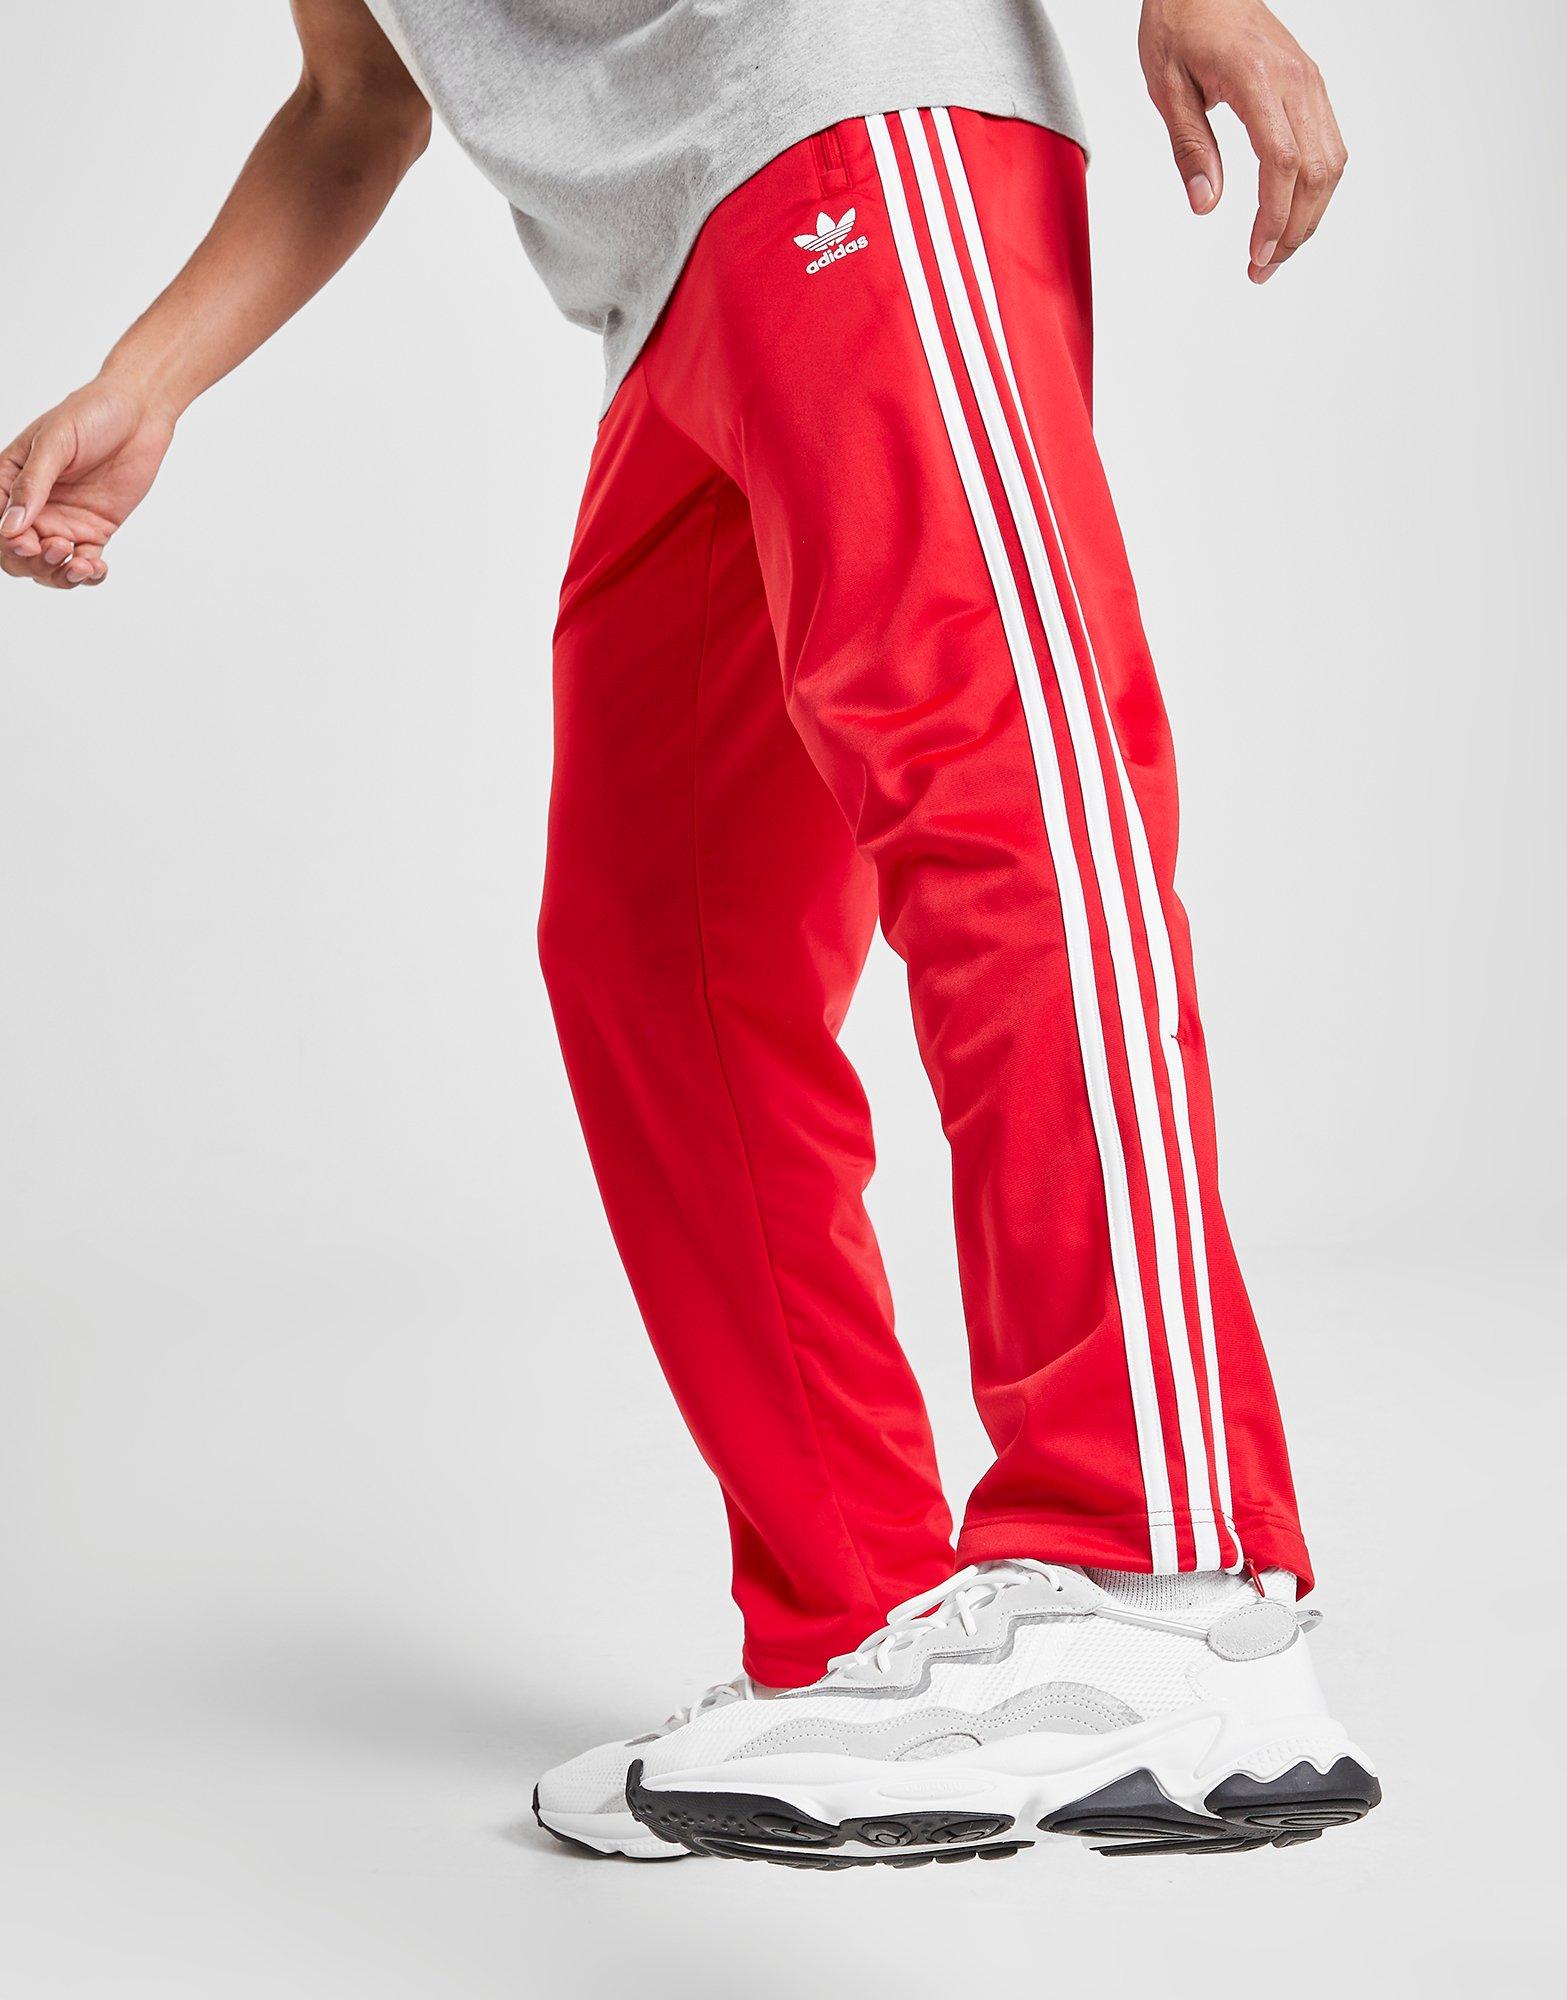 adidas joggers with vans